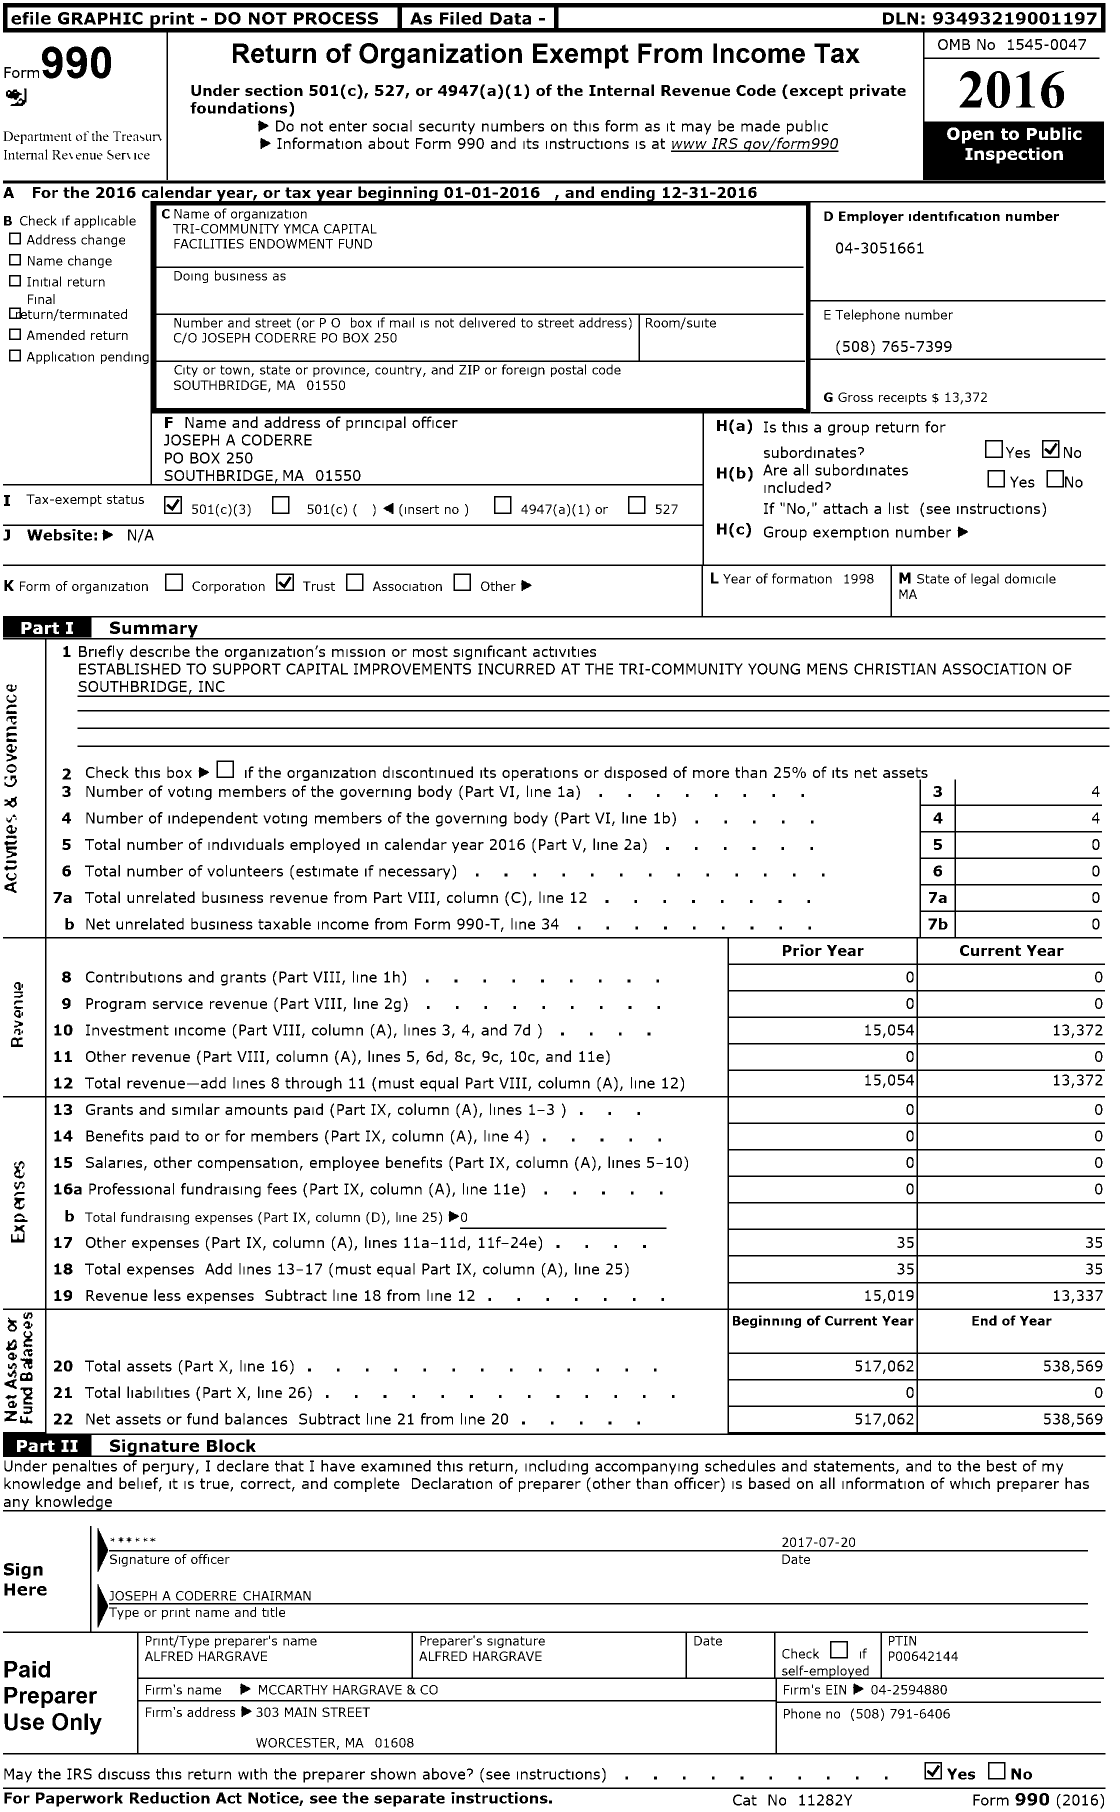 Image of first page of 2016 Form 990 for Tri-Community Ymca Capital Facilities Endowment Fund